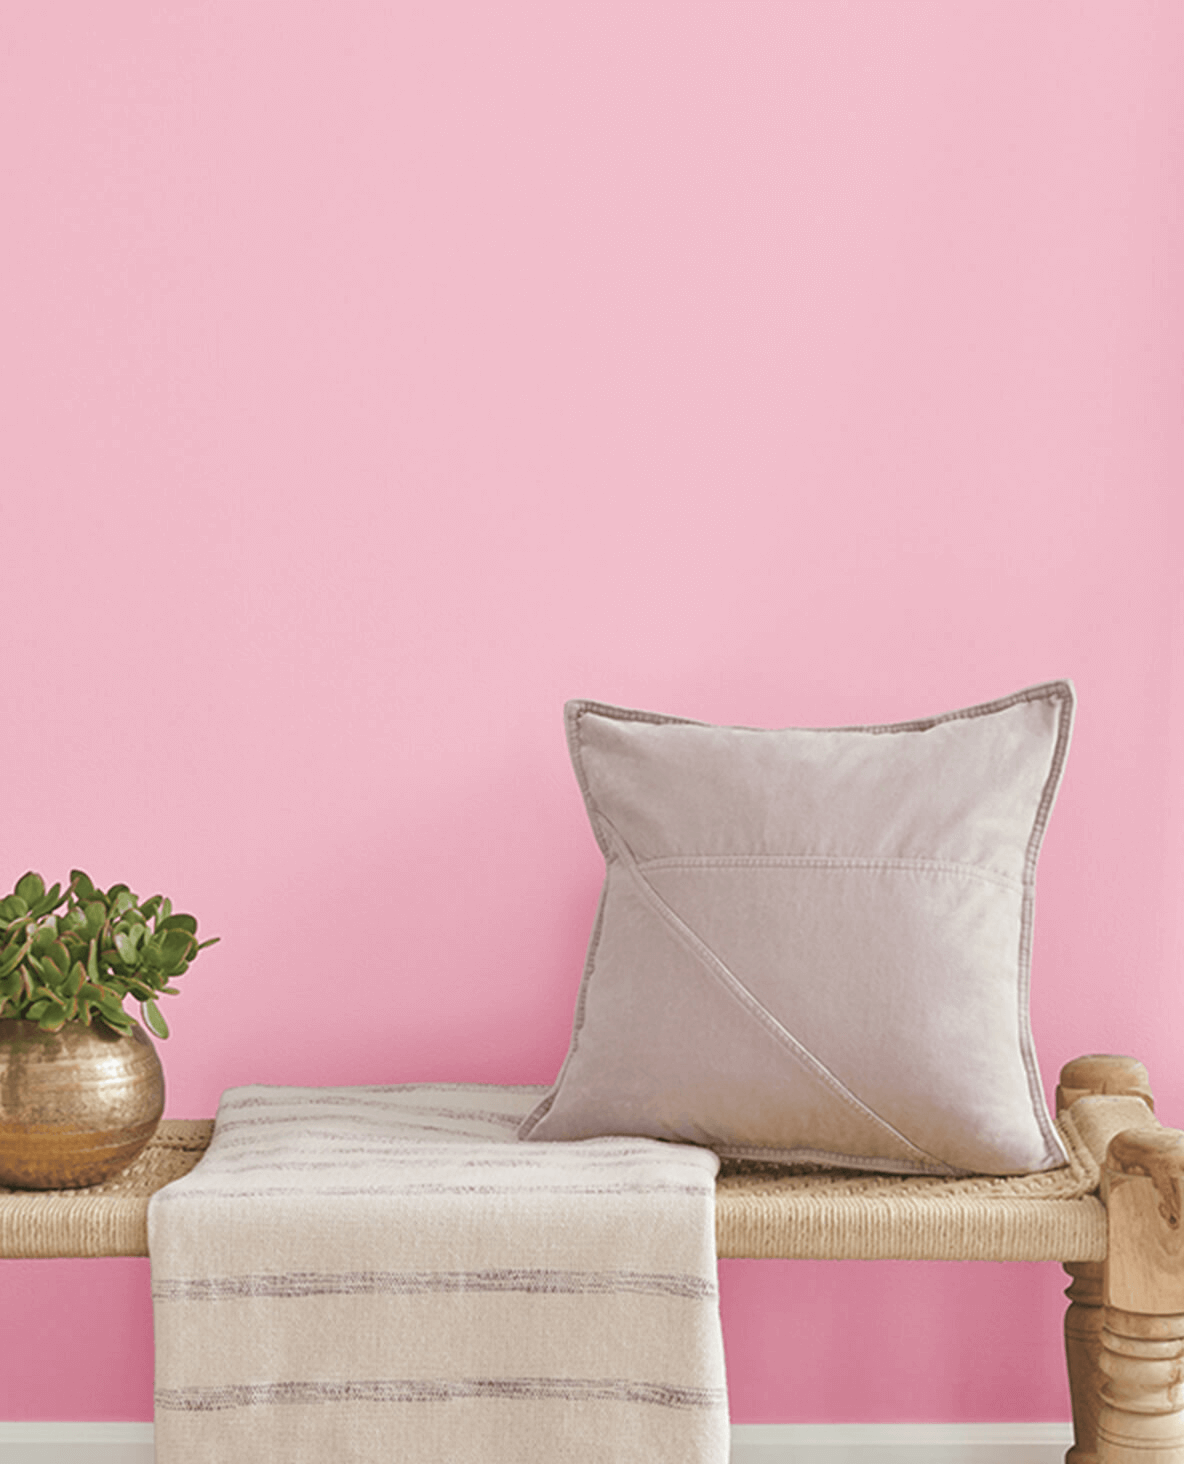 hoover 652 pink paint  Pink paint colors, Pink paint colors sherwin  williams, Paint colors for home